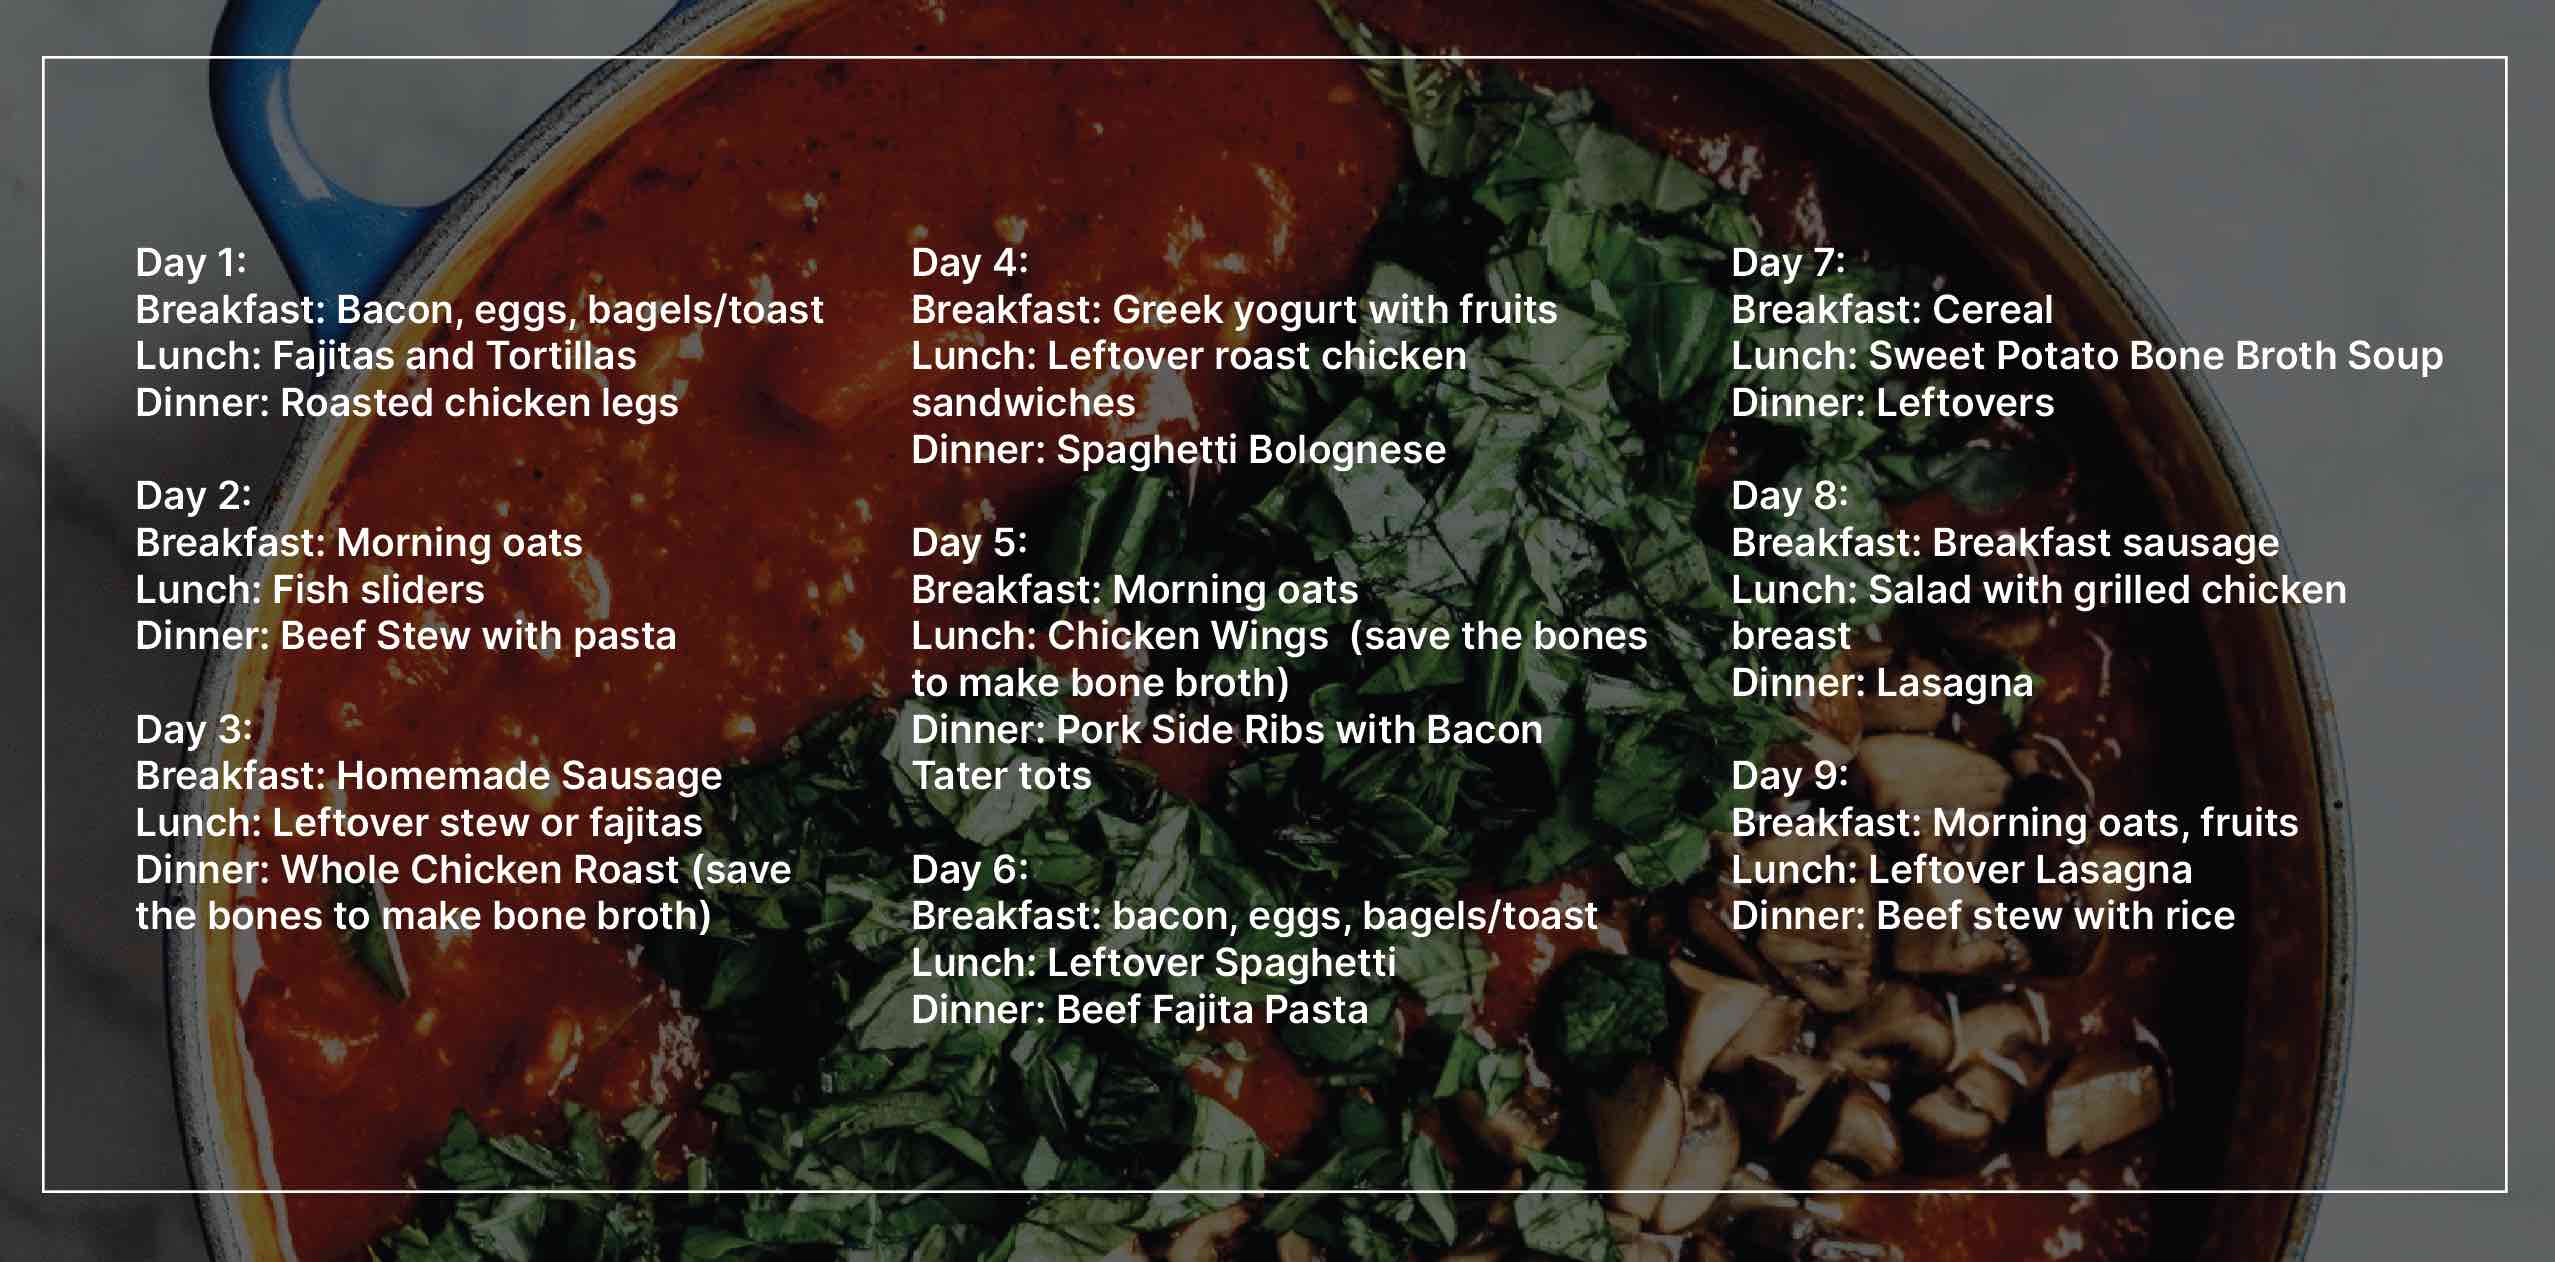 A stew simmering in a pot with an overlay. The text depicts the 9 Day Meal Plan below.